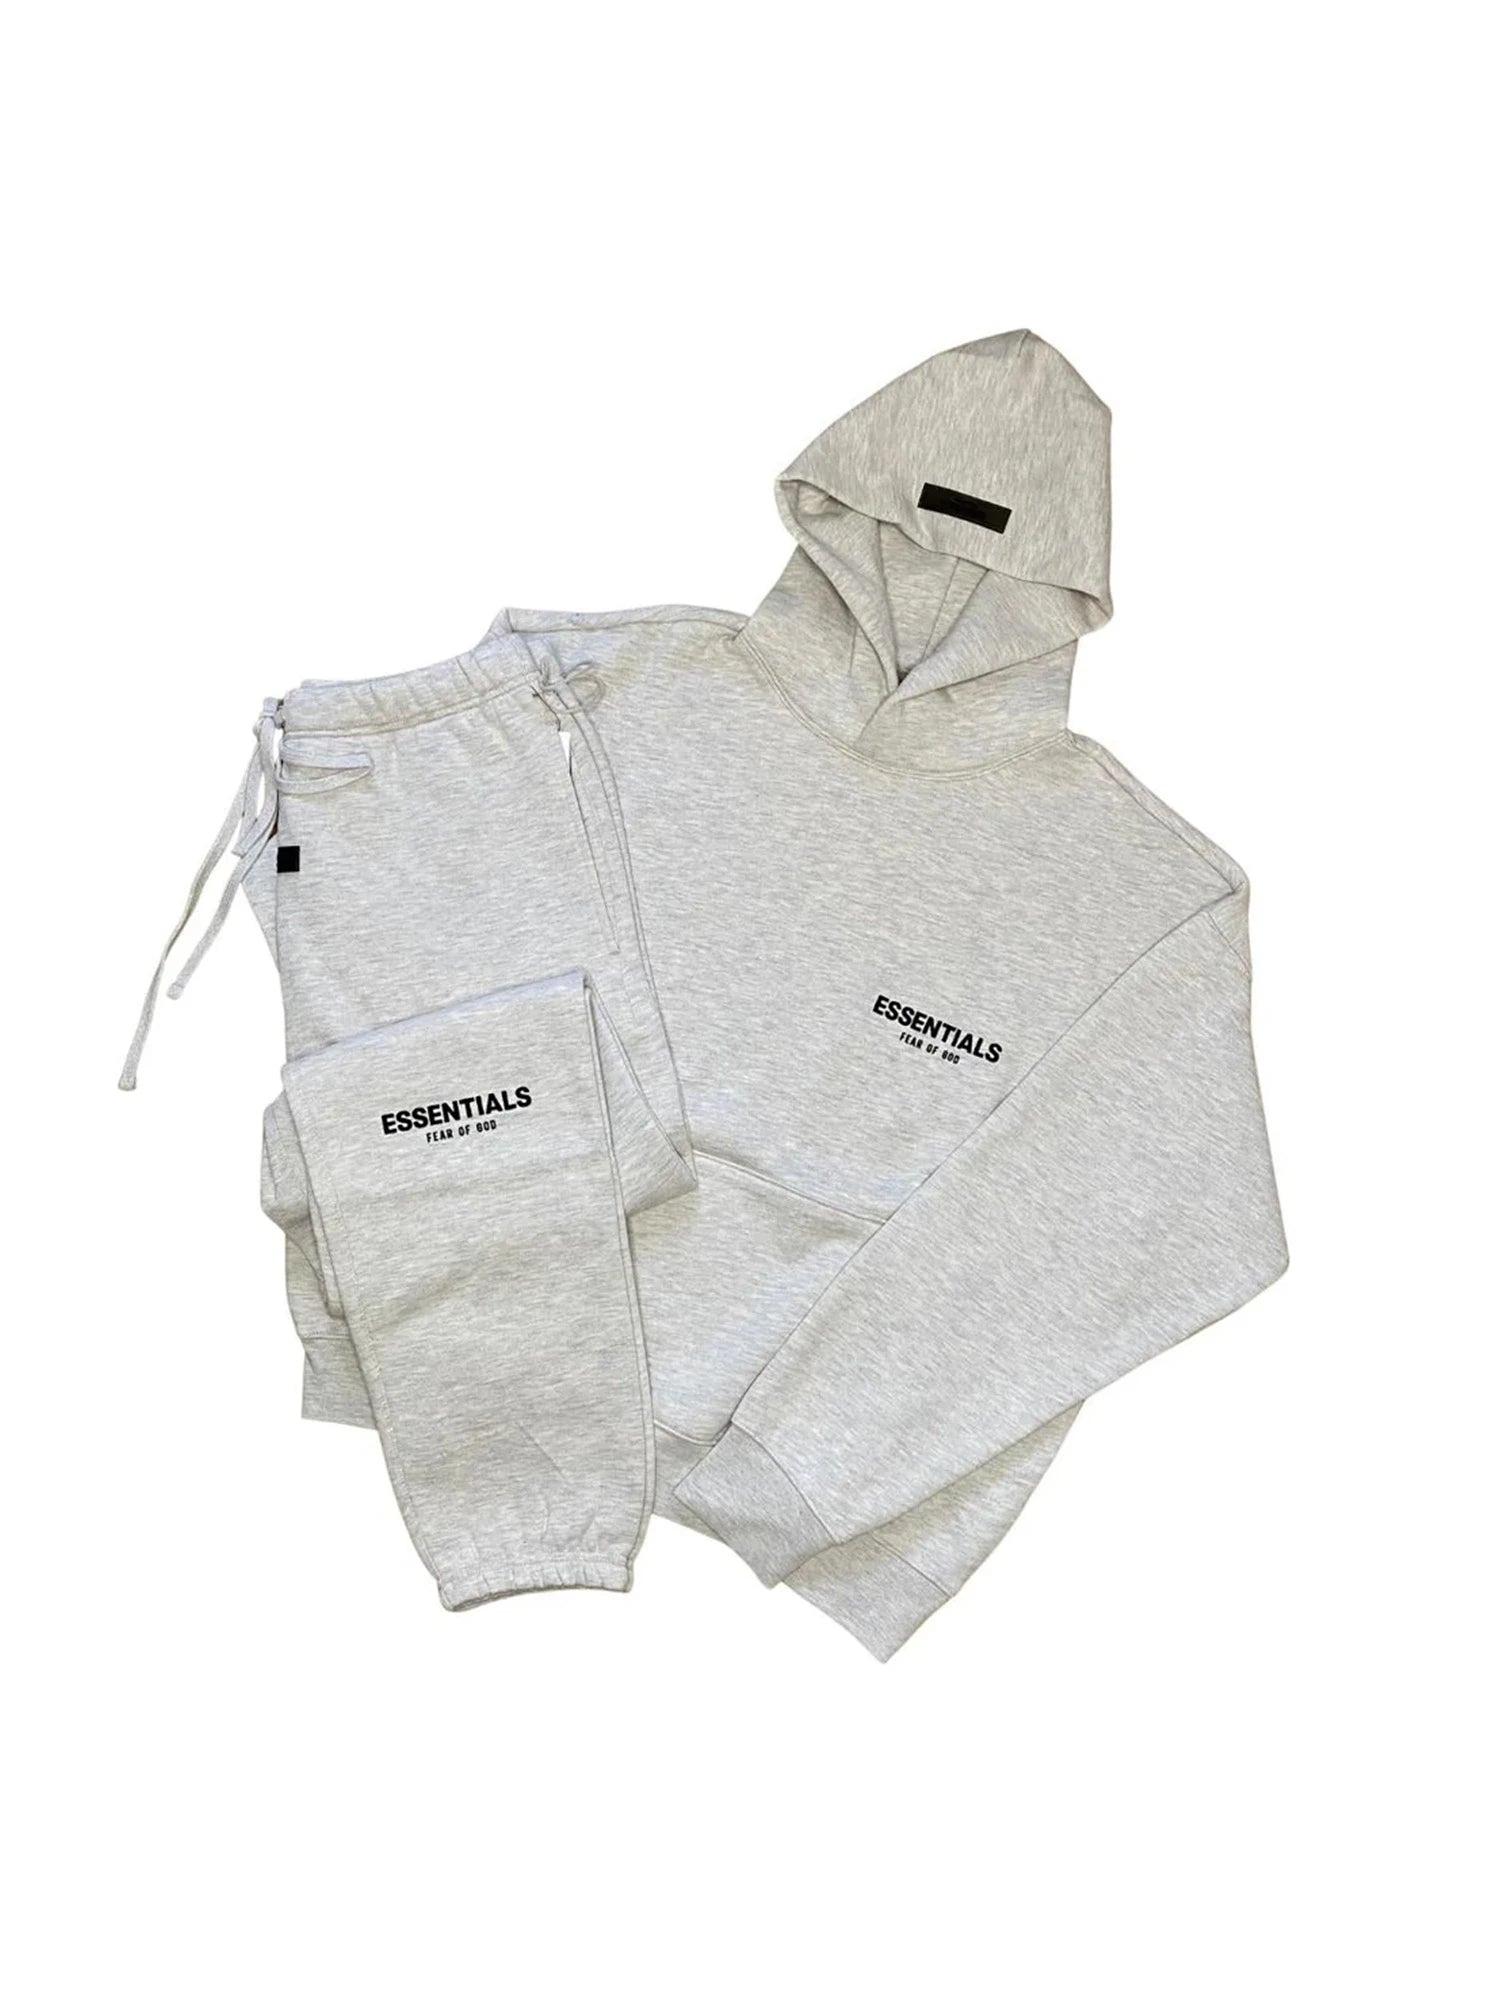 Fear Of God Essentials Tracksuit S22 Light Oatmeal